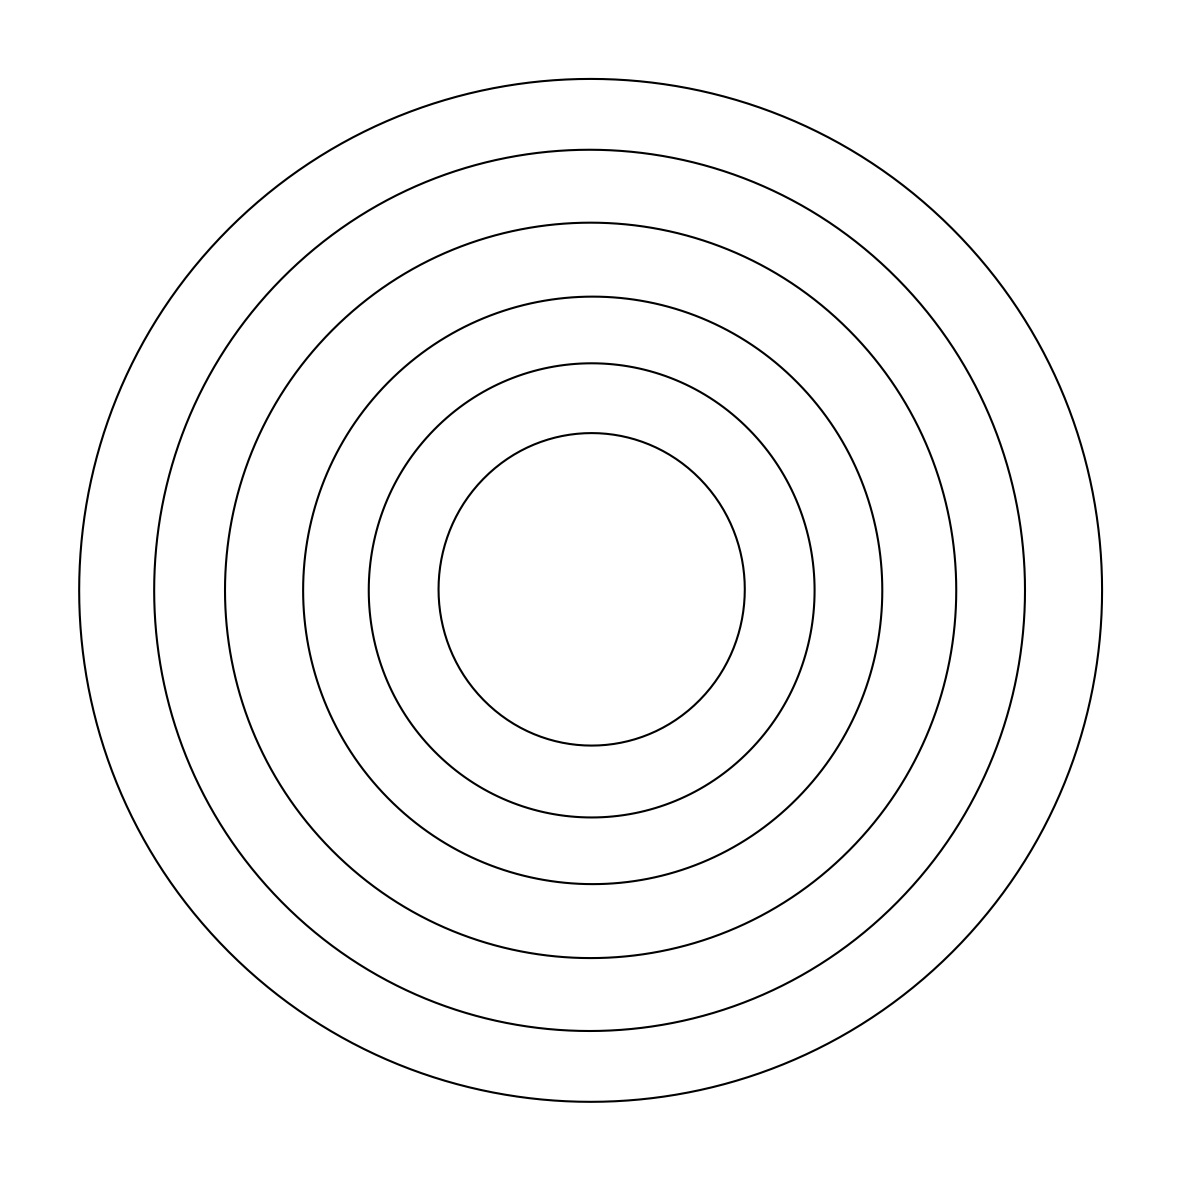 concentric-circle-s-of-support-sketch-coloring-page